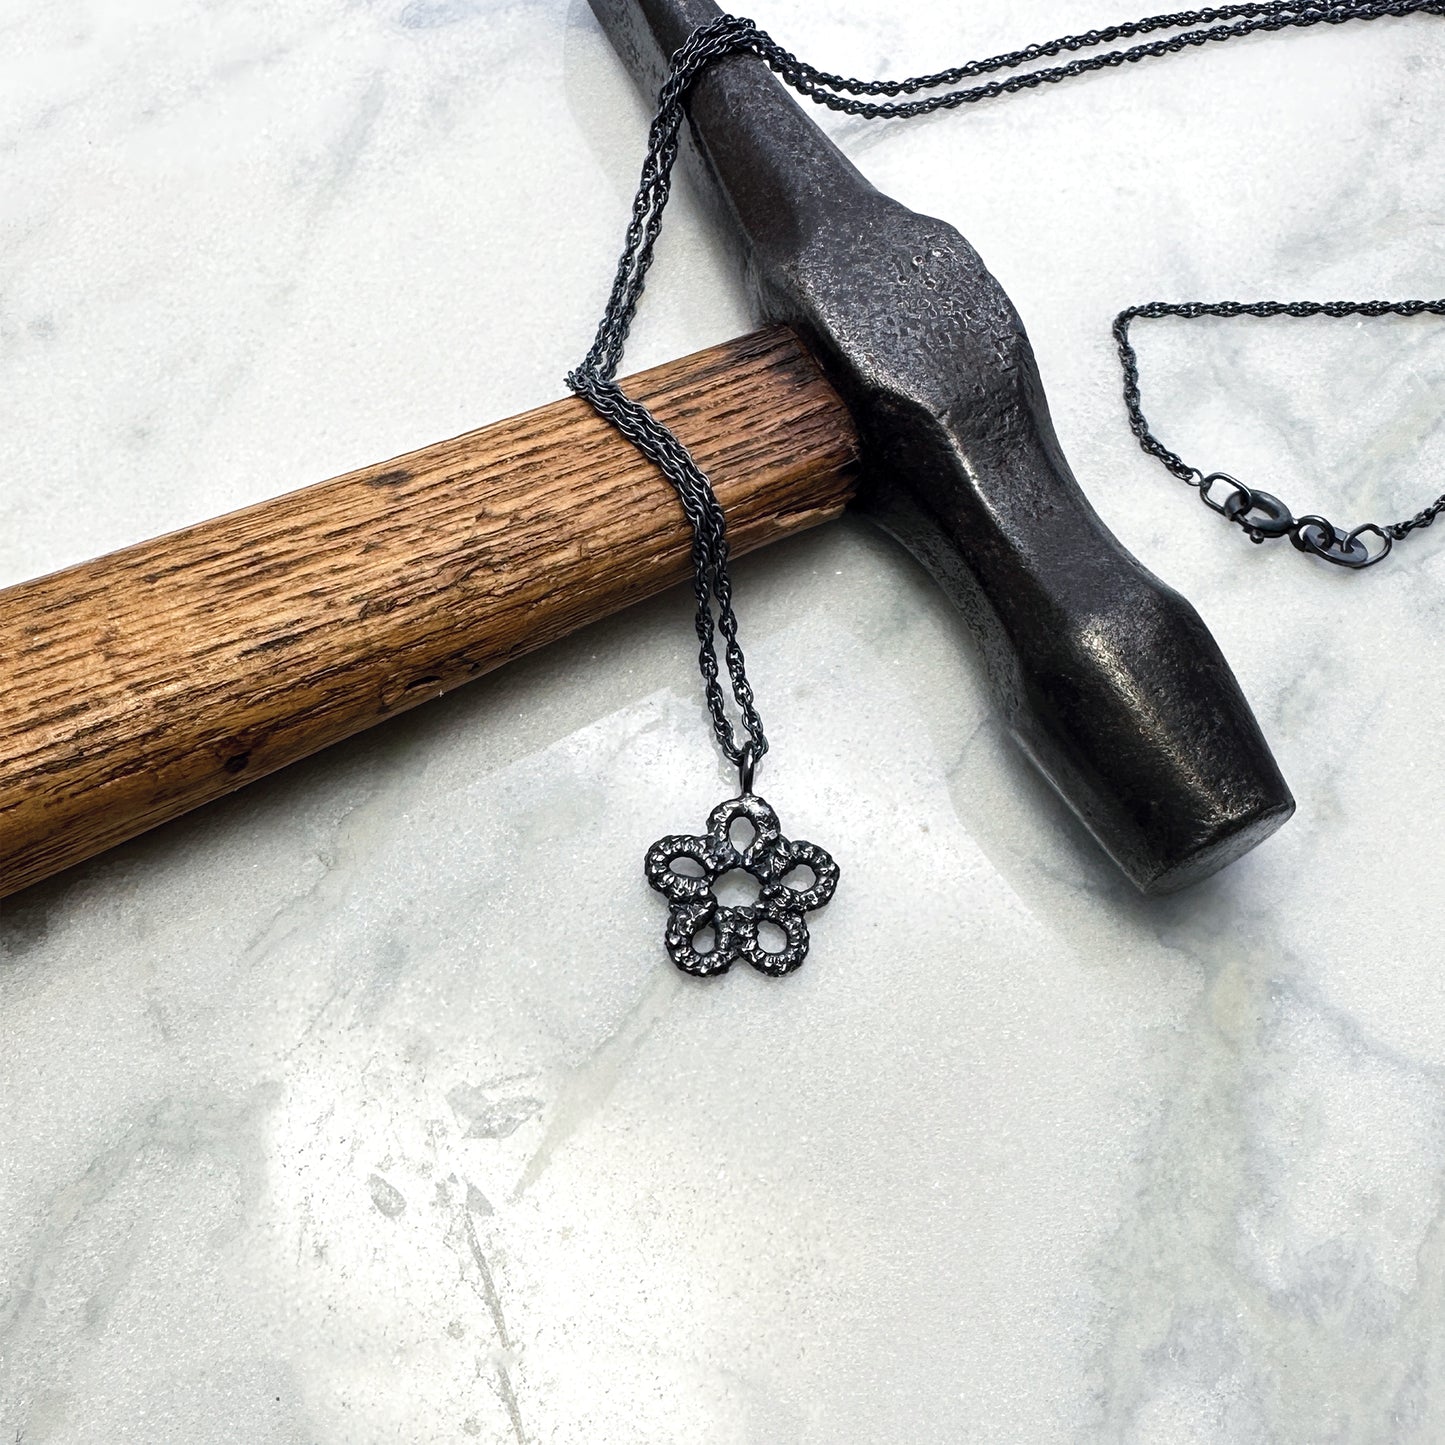 Forget-me-not necklace in oxidised silver